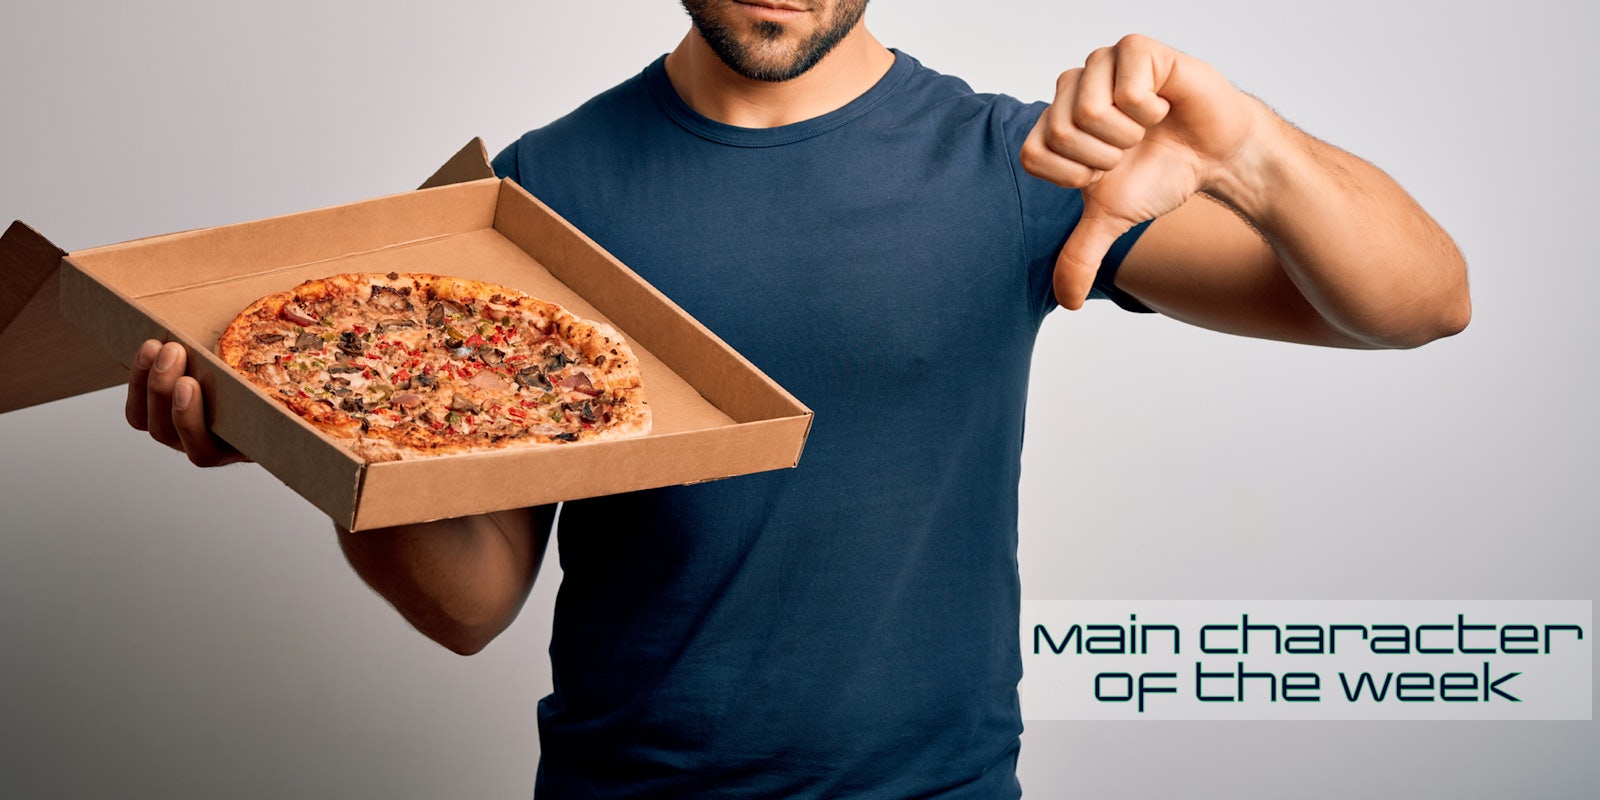 A person holding a pizza and holding his thumb down. There is text in a web_crawlr font that says 'Main Character of the Week' in the lower right corner.